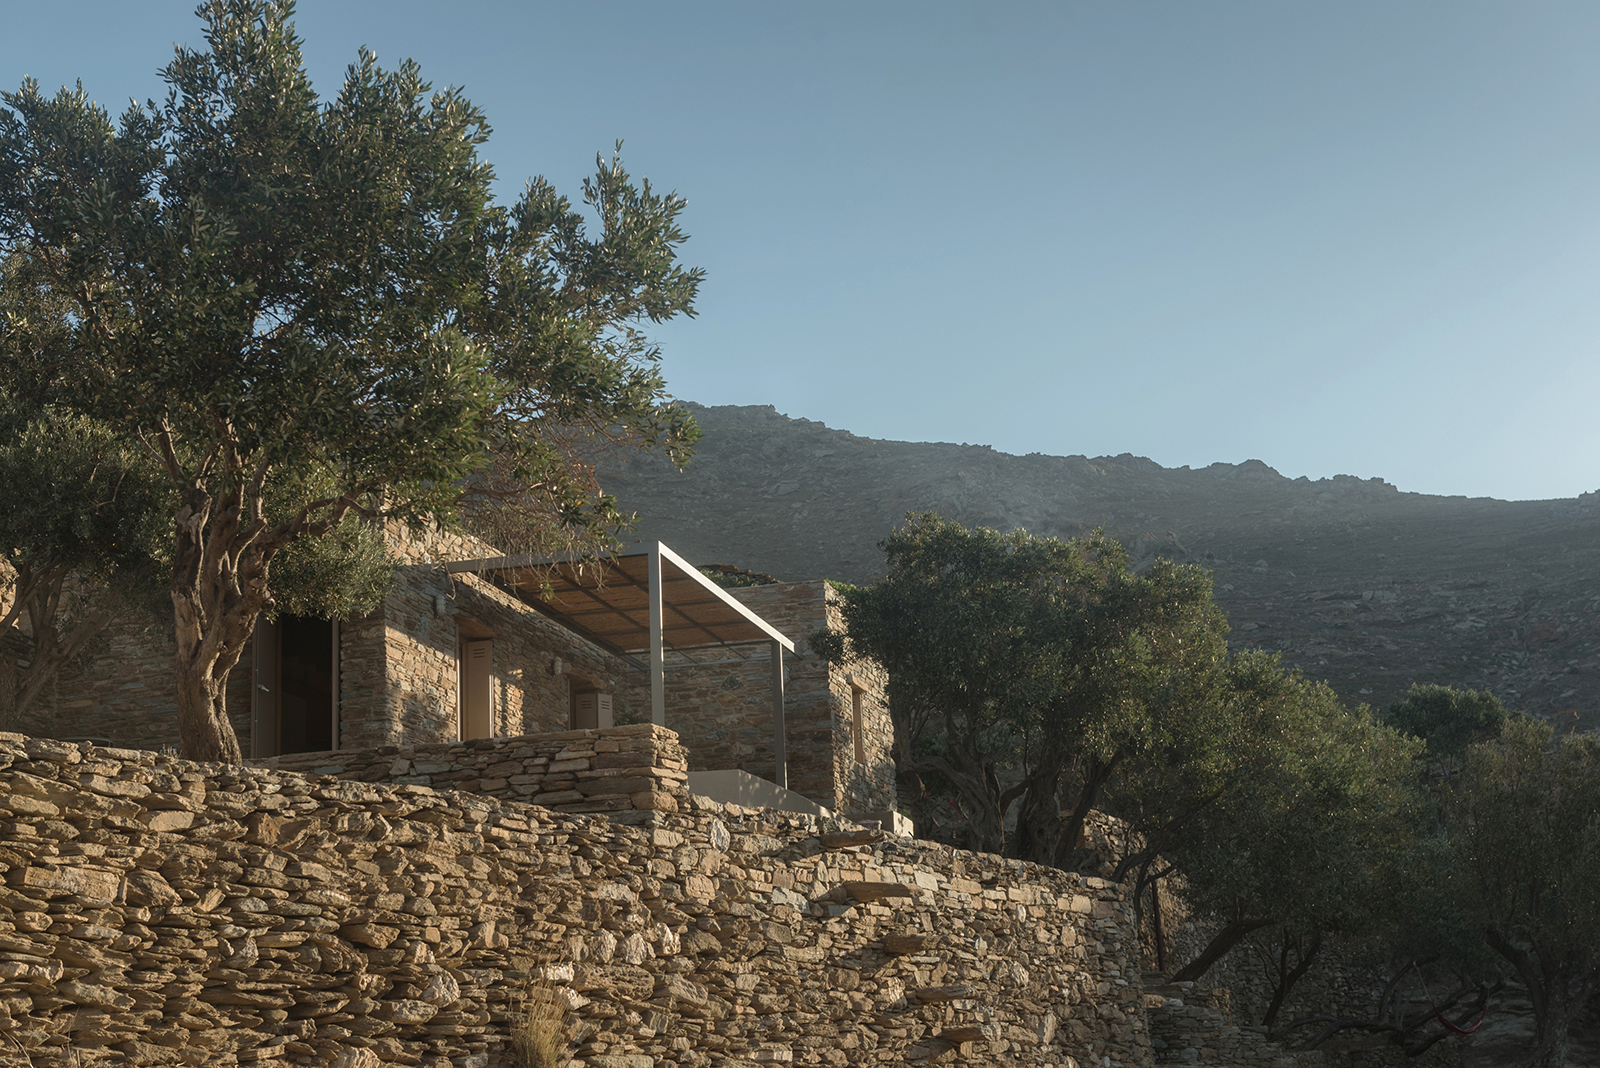 Archisearch Maria Vidali designed Avdos house in Tinos island | Archisearch